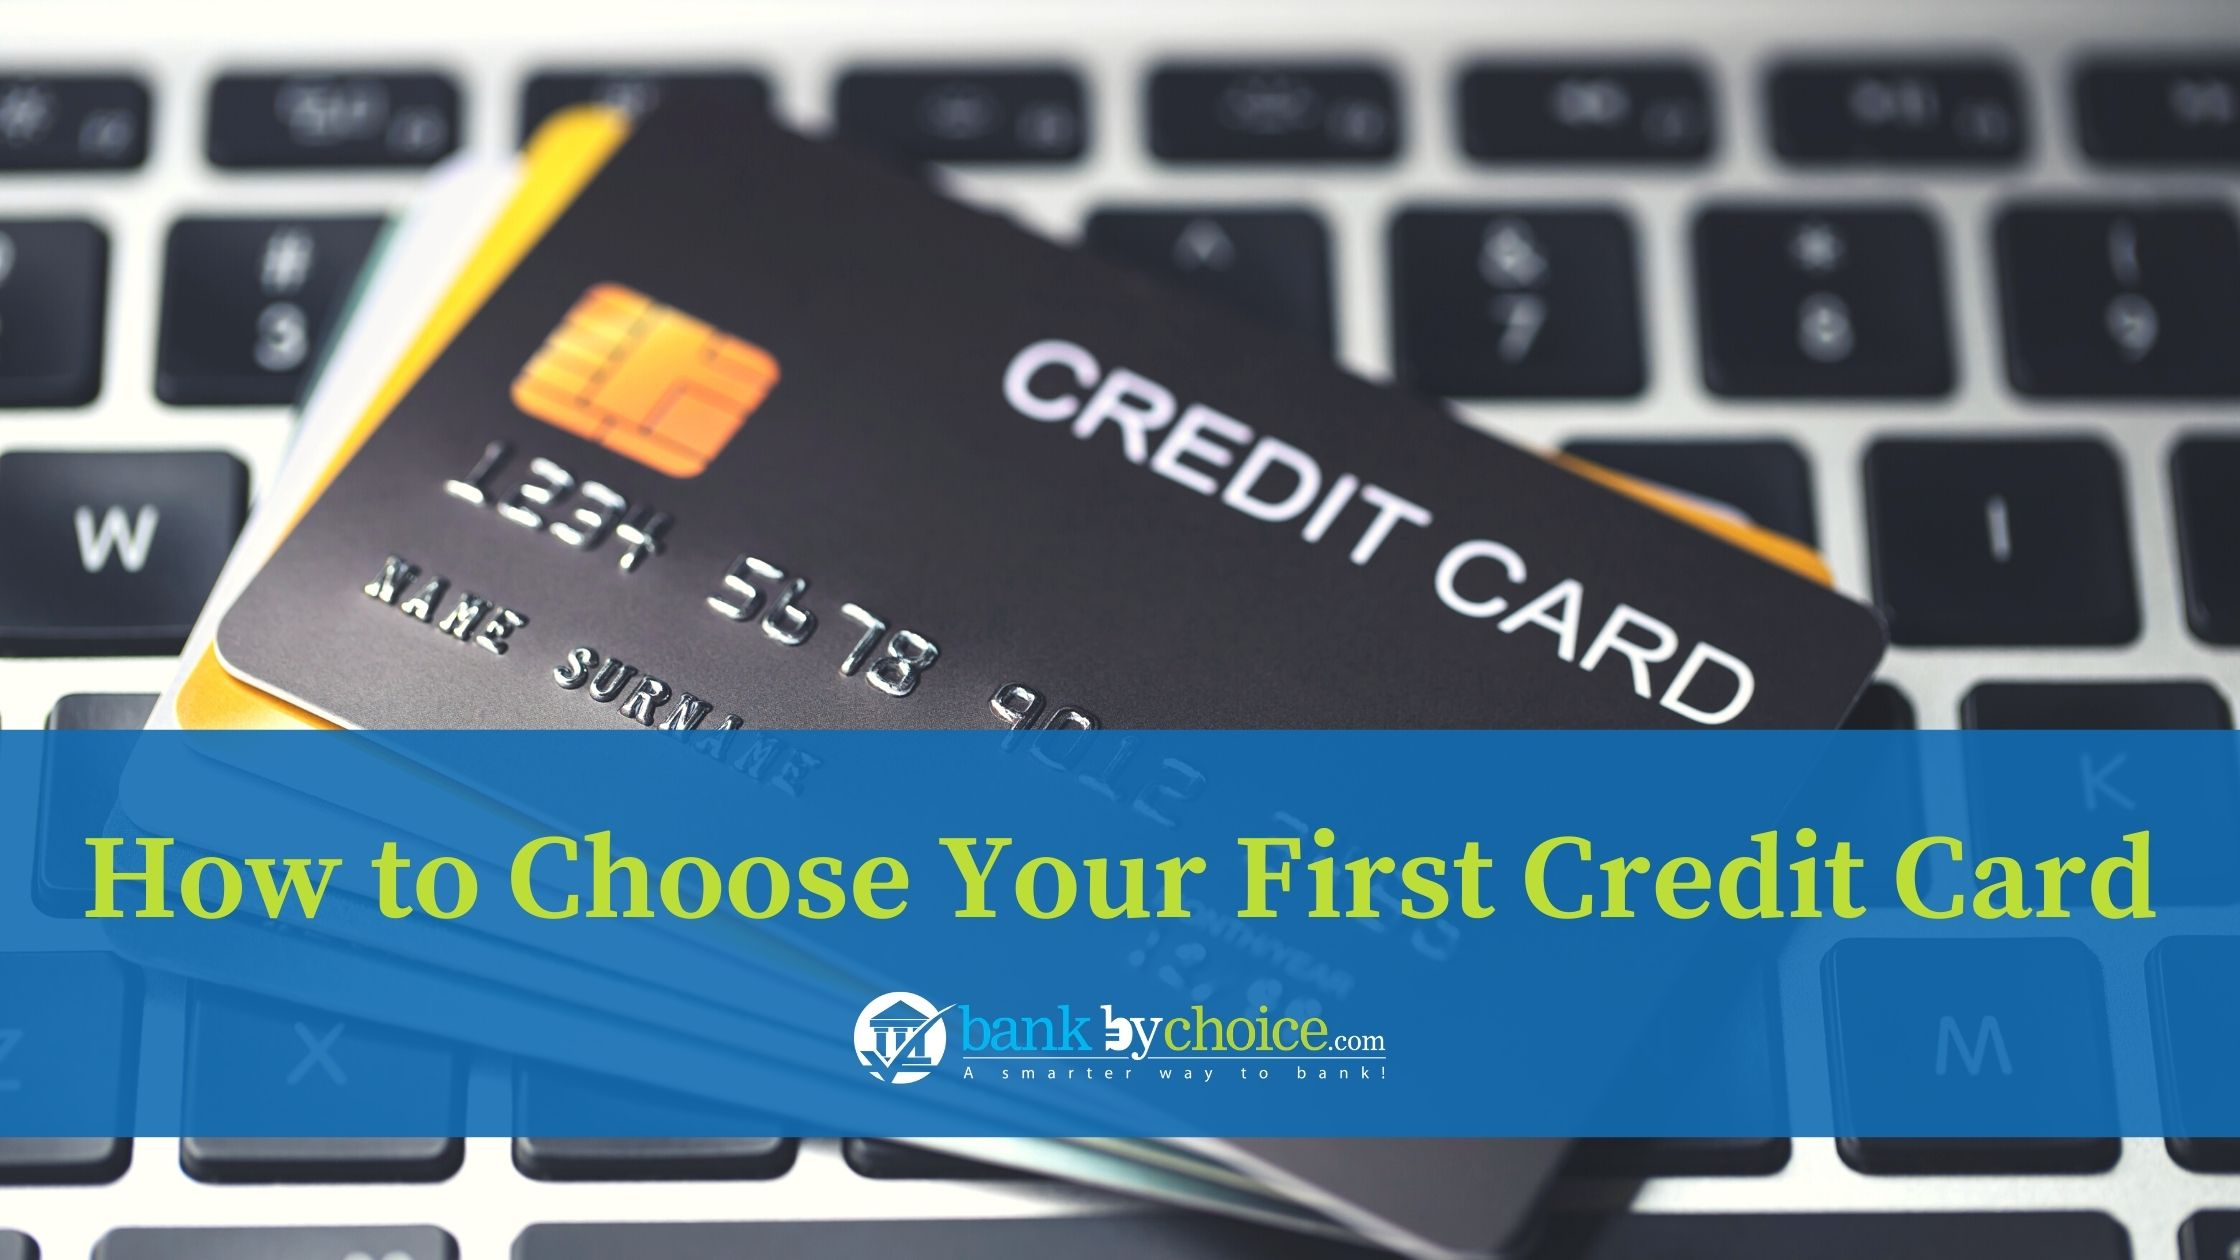 Best credit cards in uae- Bankbychoice